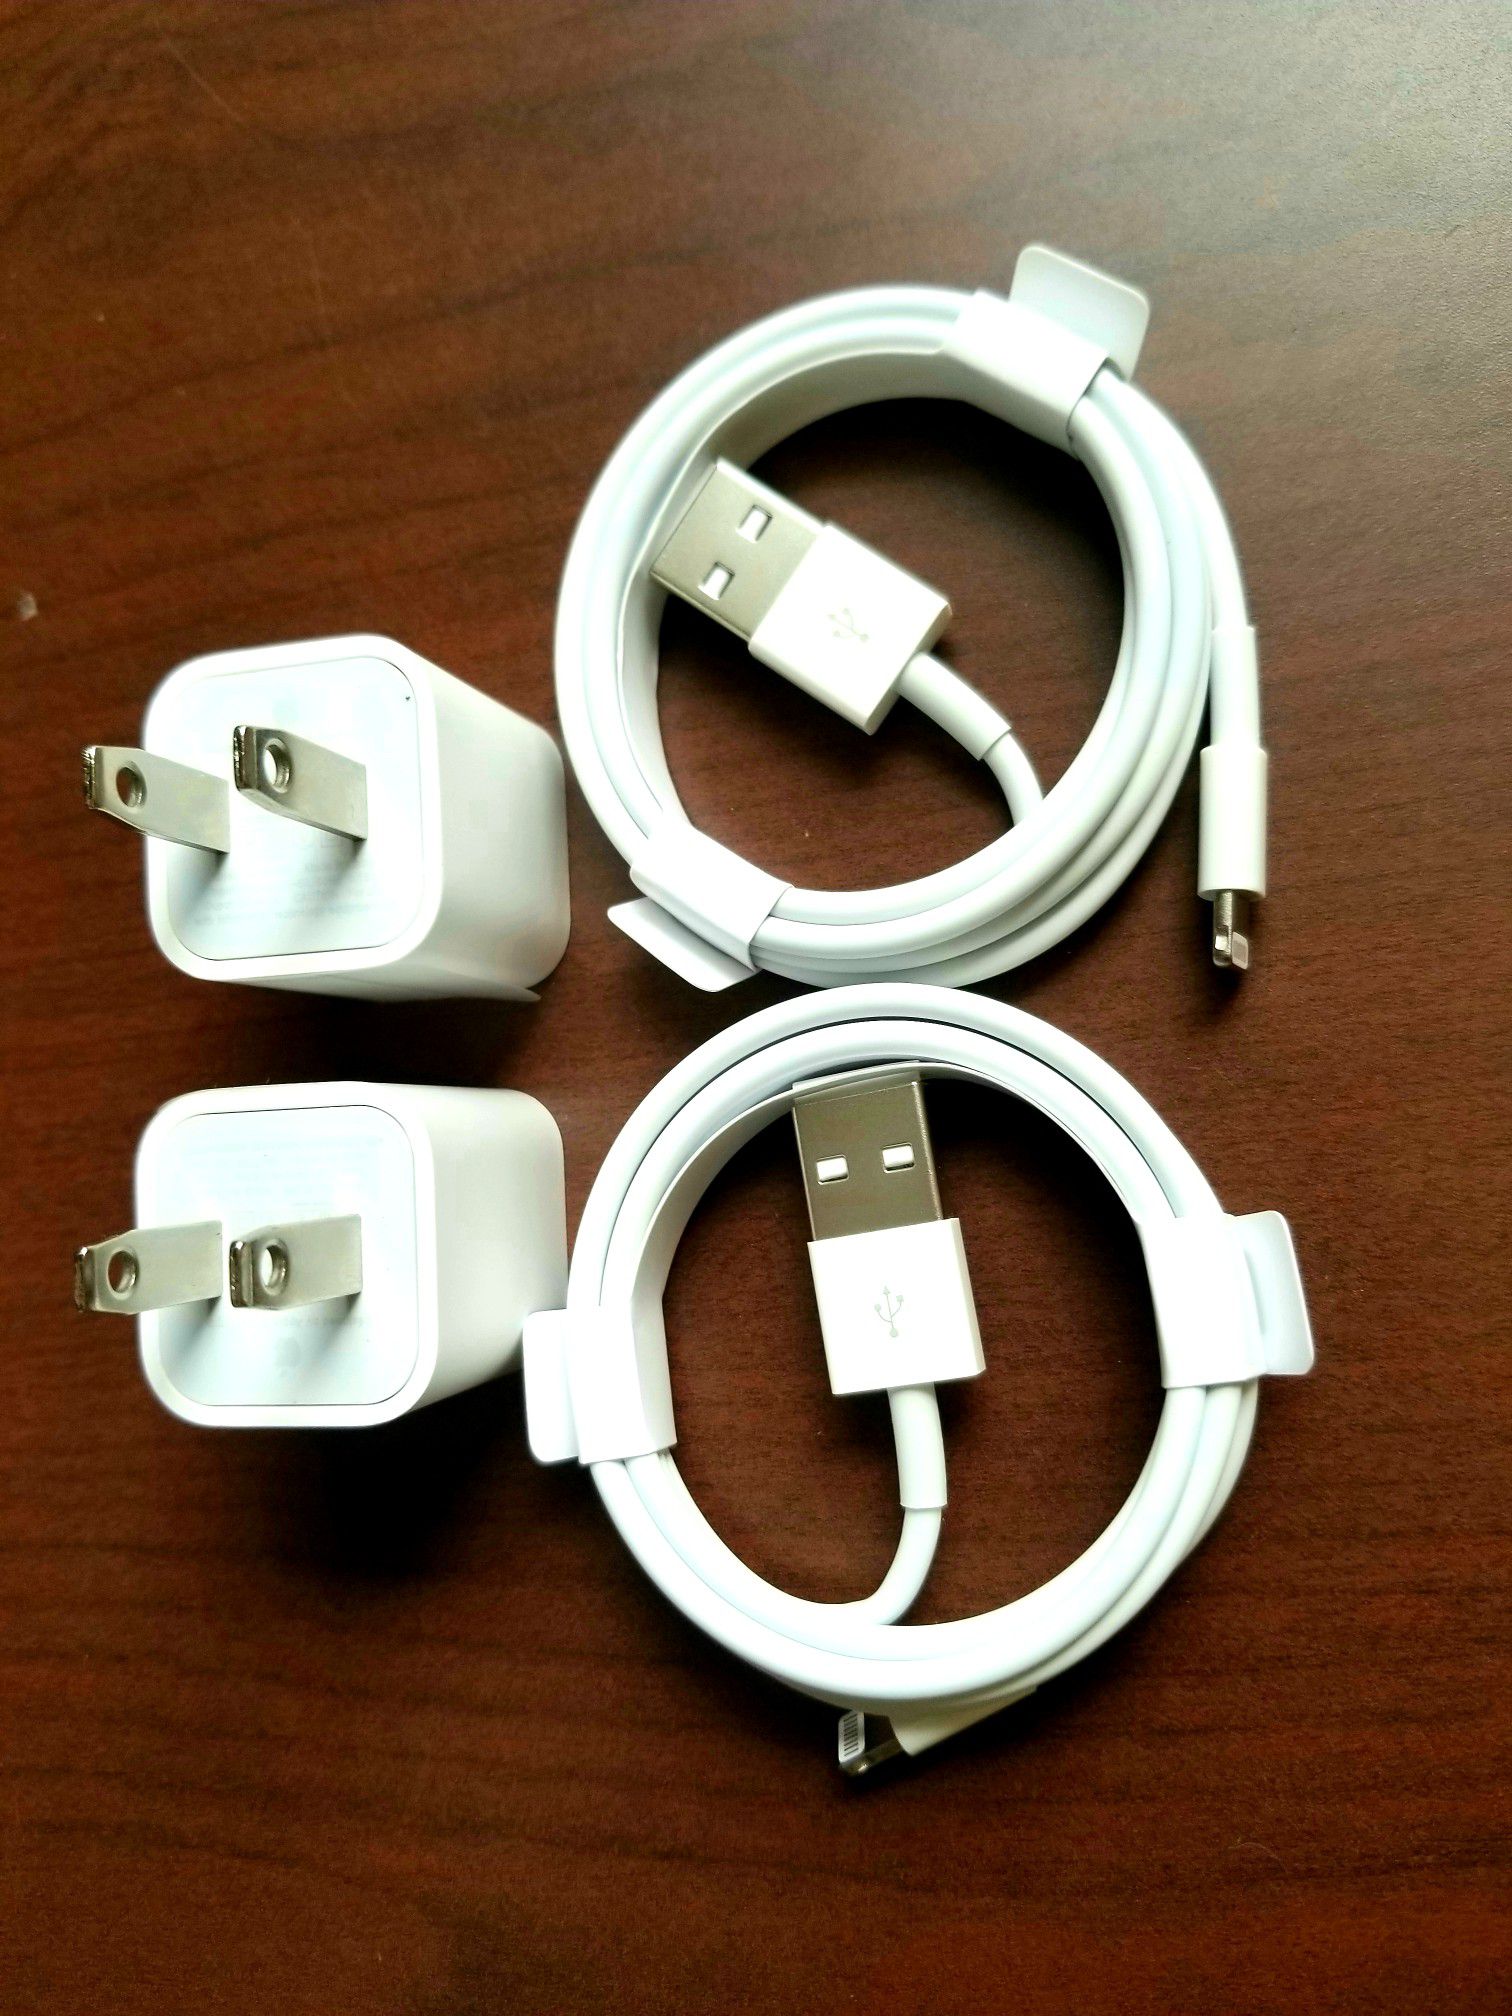 2 Brand new original iphone chargers